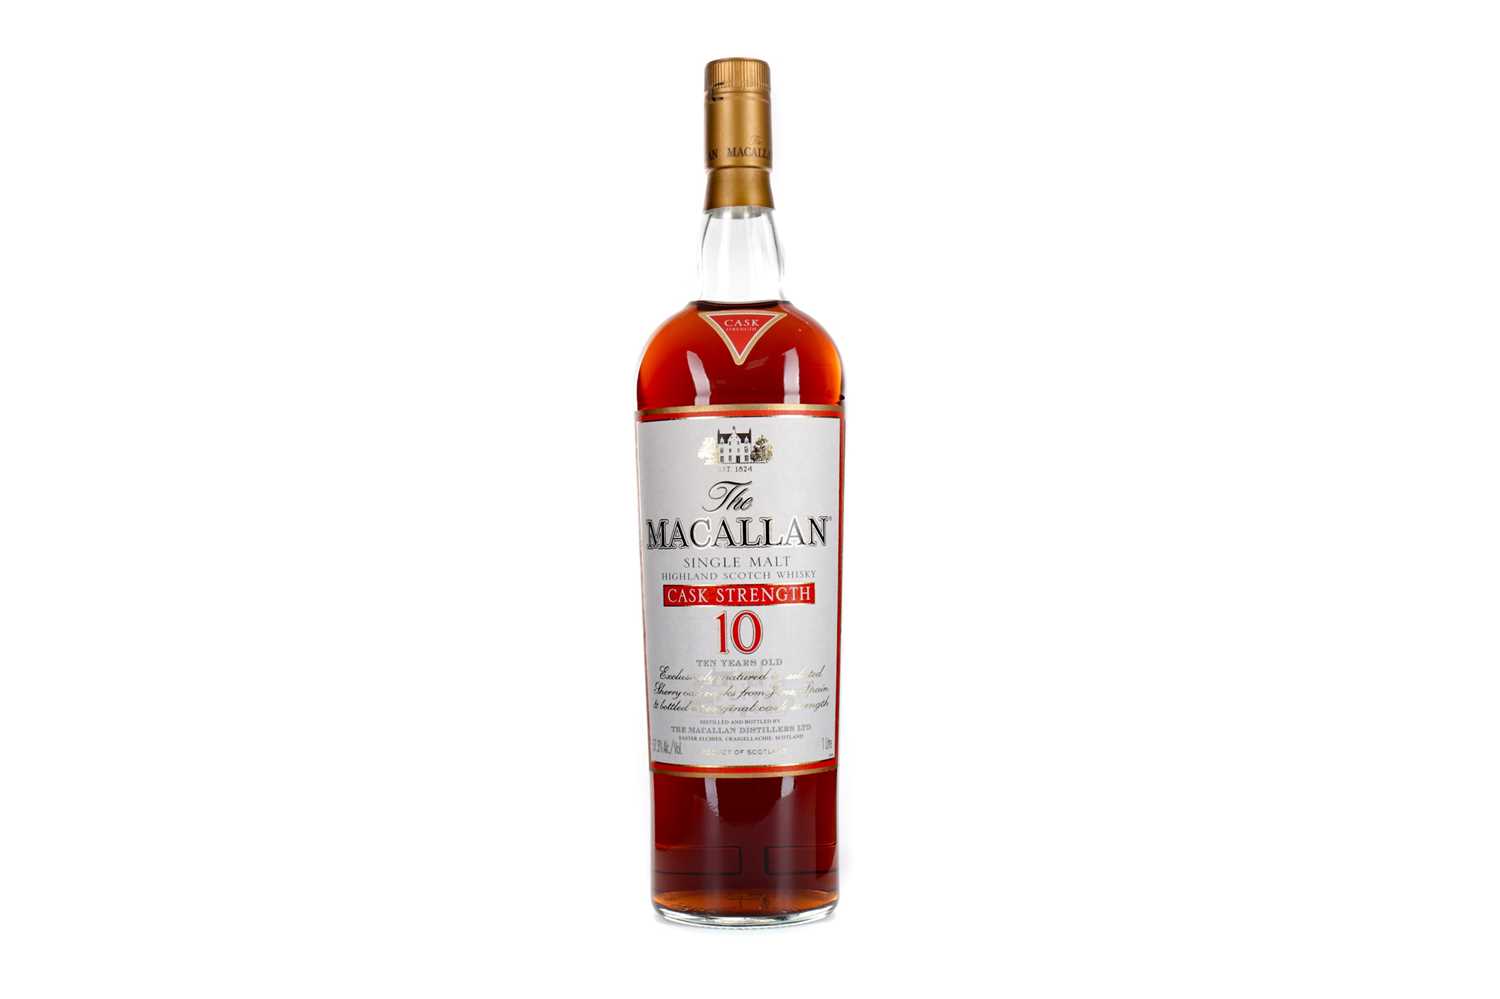 Lot 141 - MACALLAN CASK STRENGTH 10 YEARS OLD - ONE LITRE